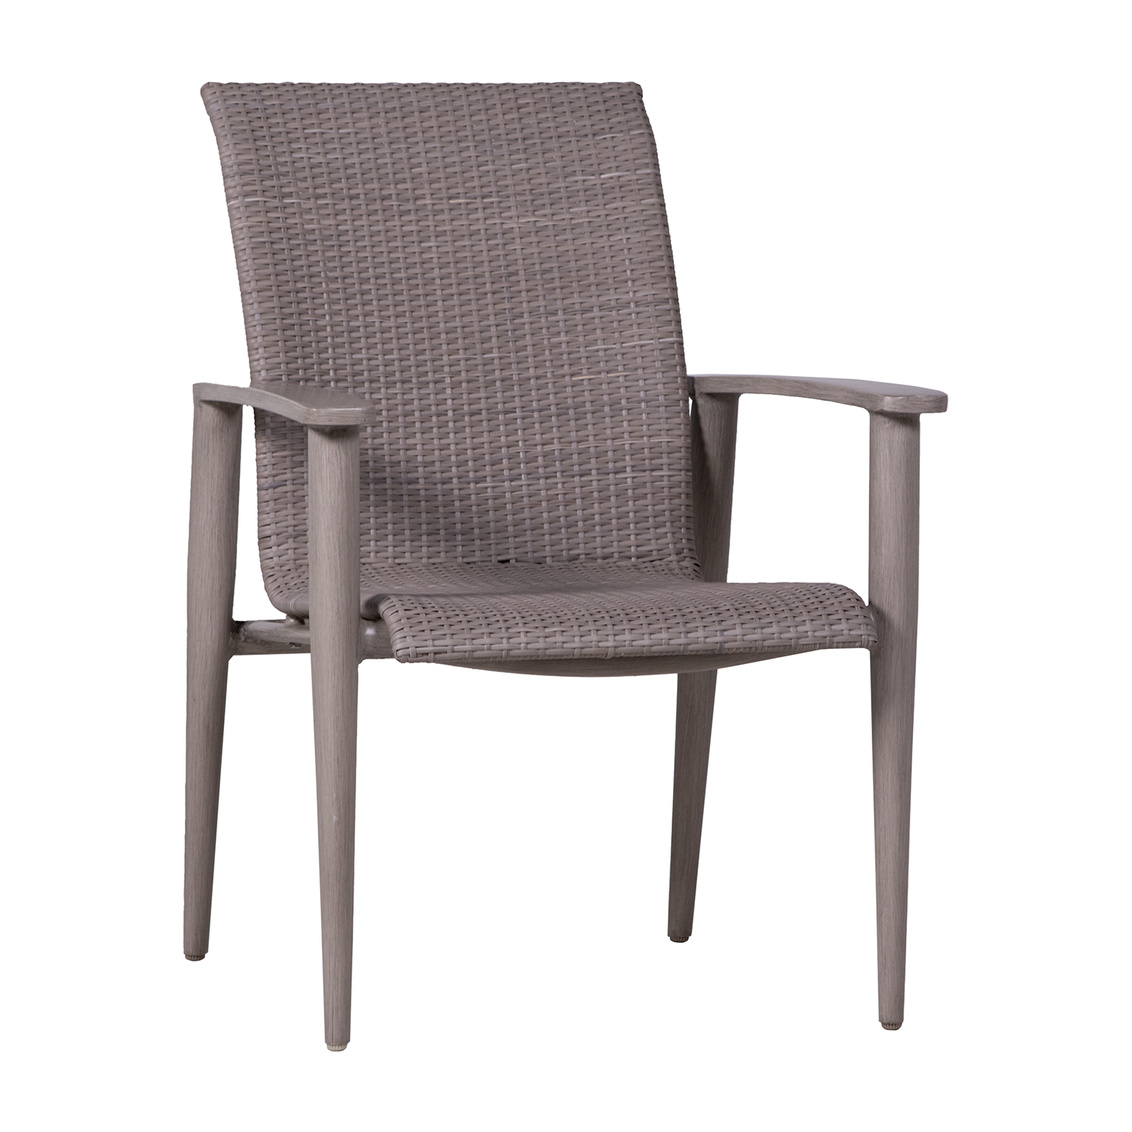 wind arm chair in oyster – frame only product image